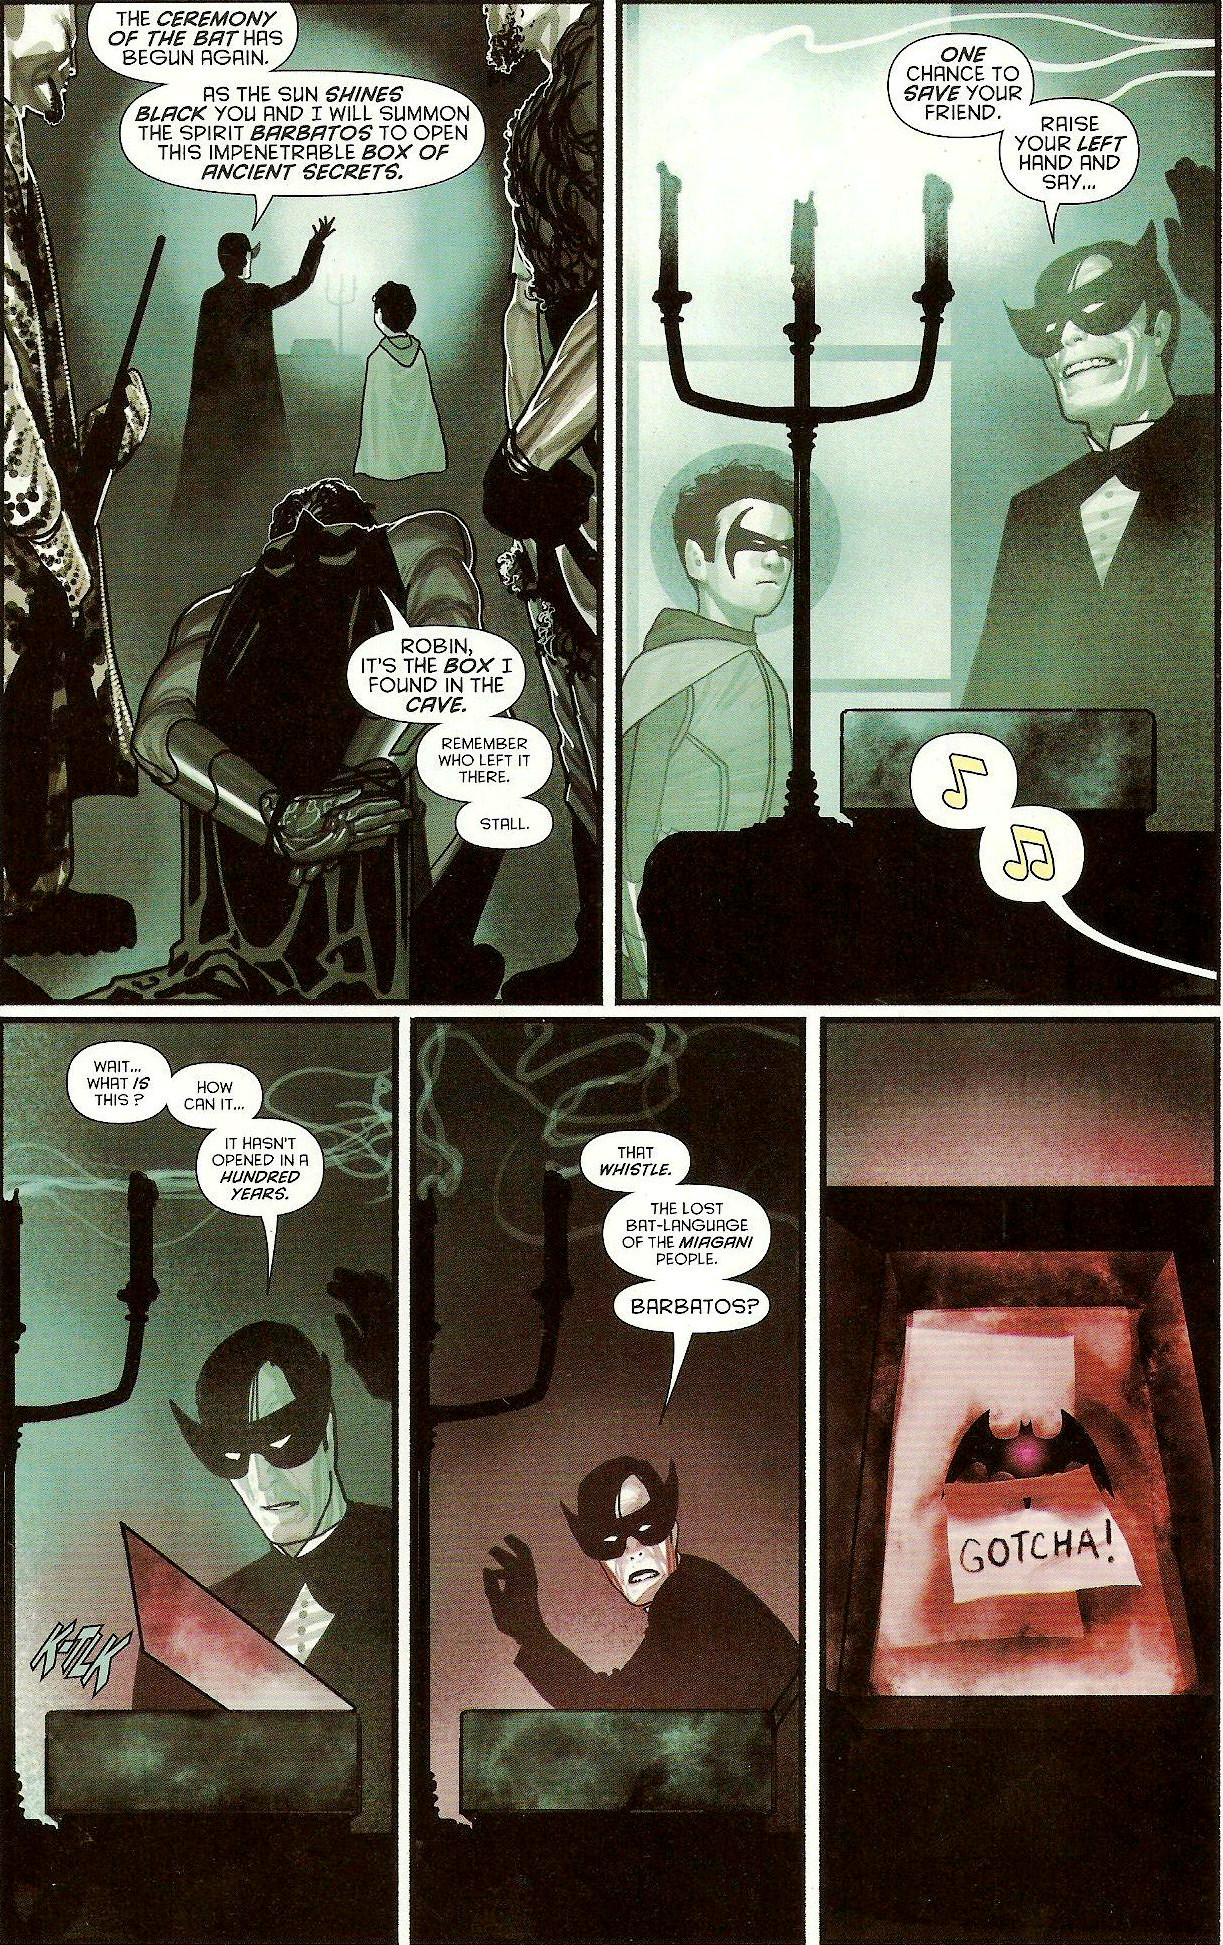 From Batman and Robin (Vol. 1) #15 (2010)